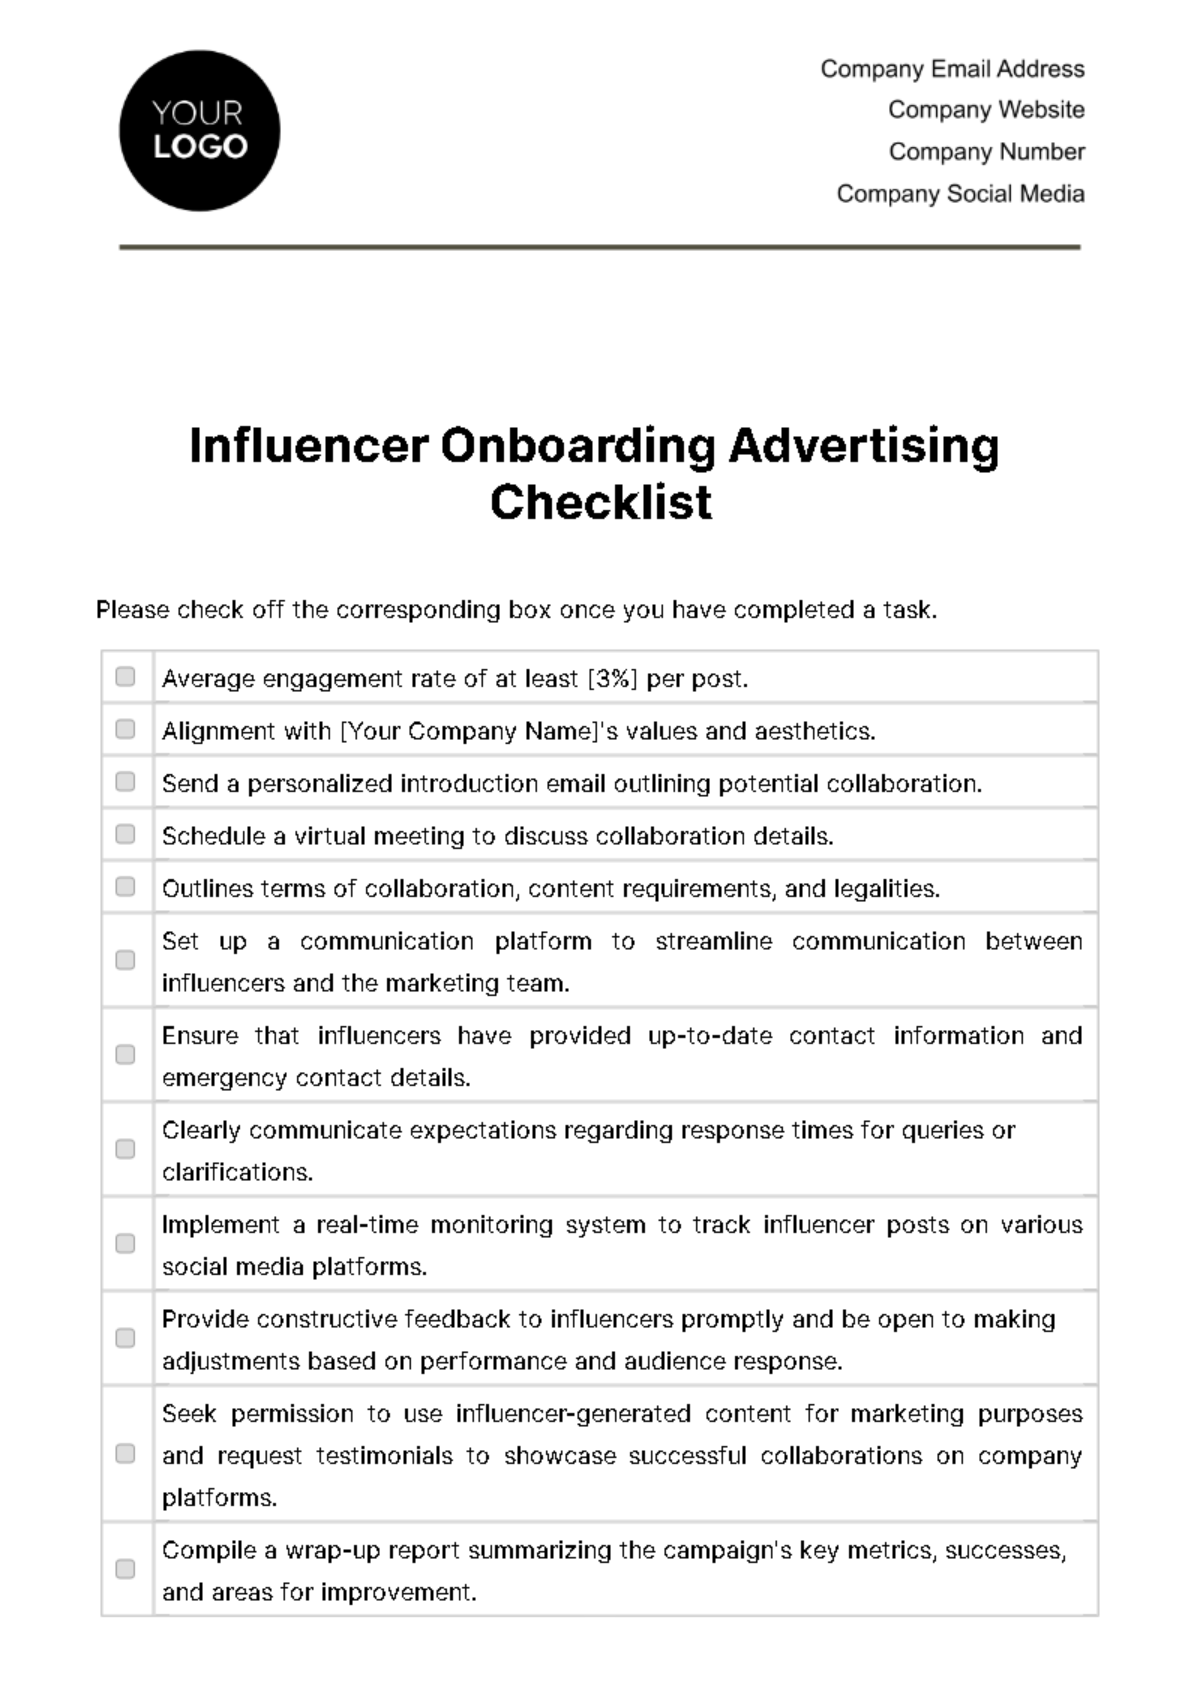 Free Influencer Onboarding Advertising Checklist Template